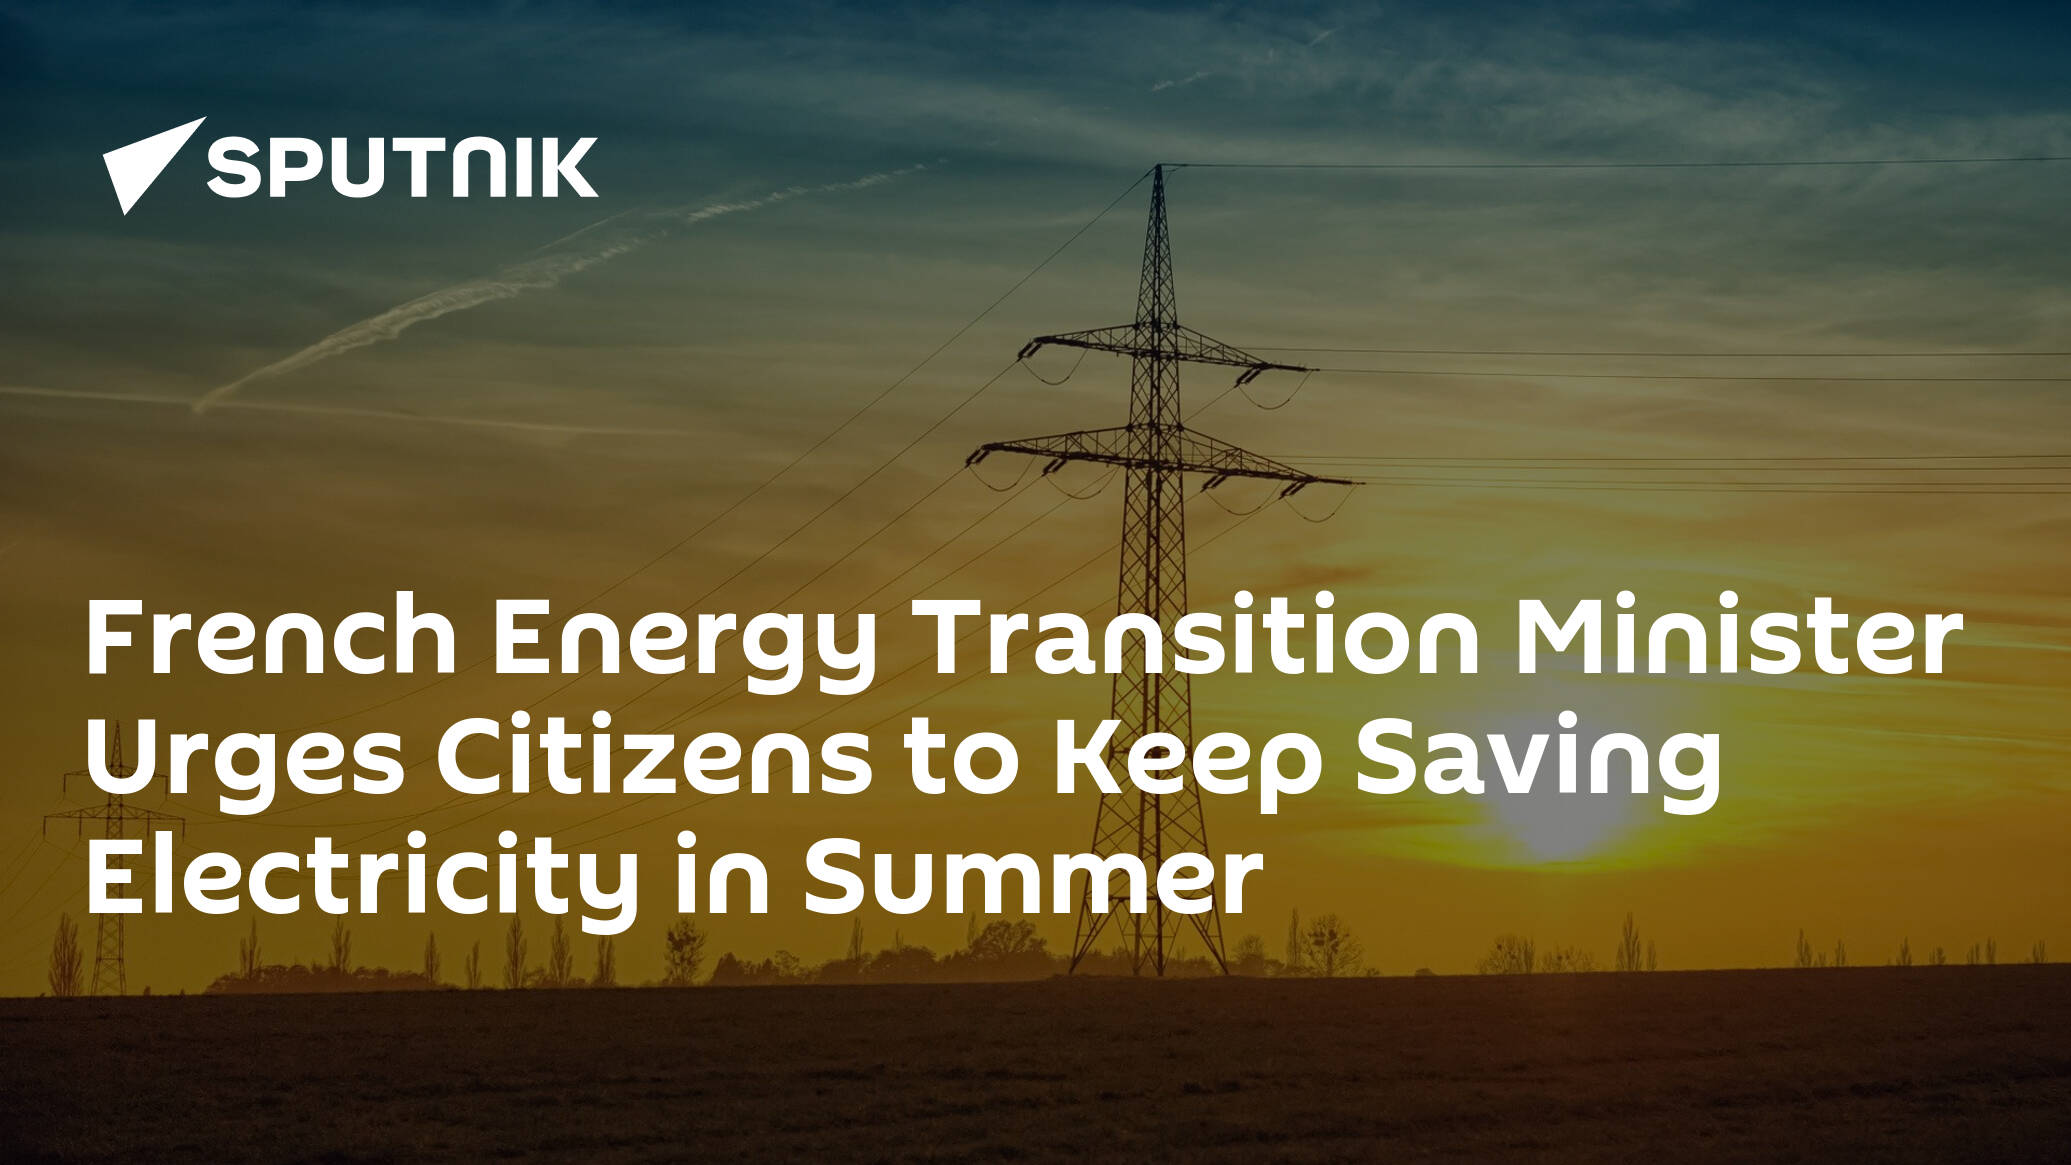 French Energy Transition Minister Urges Citizens to Keep Saving Electricity in Summer